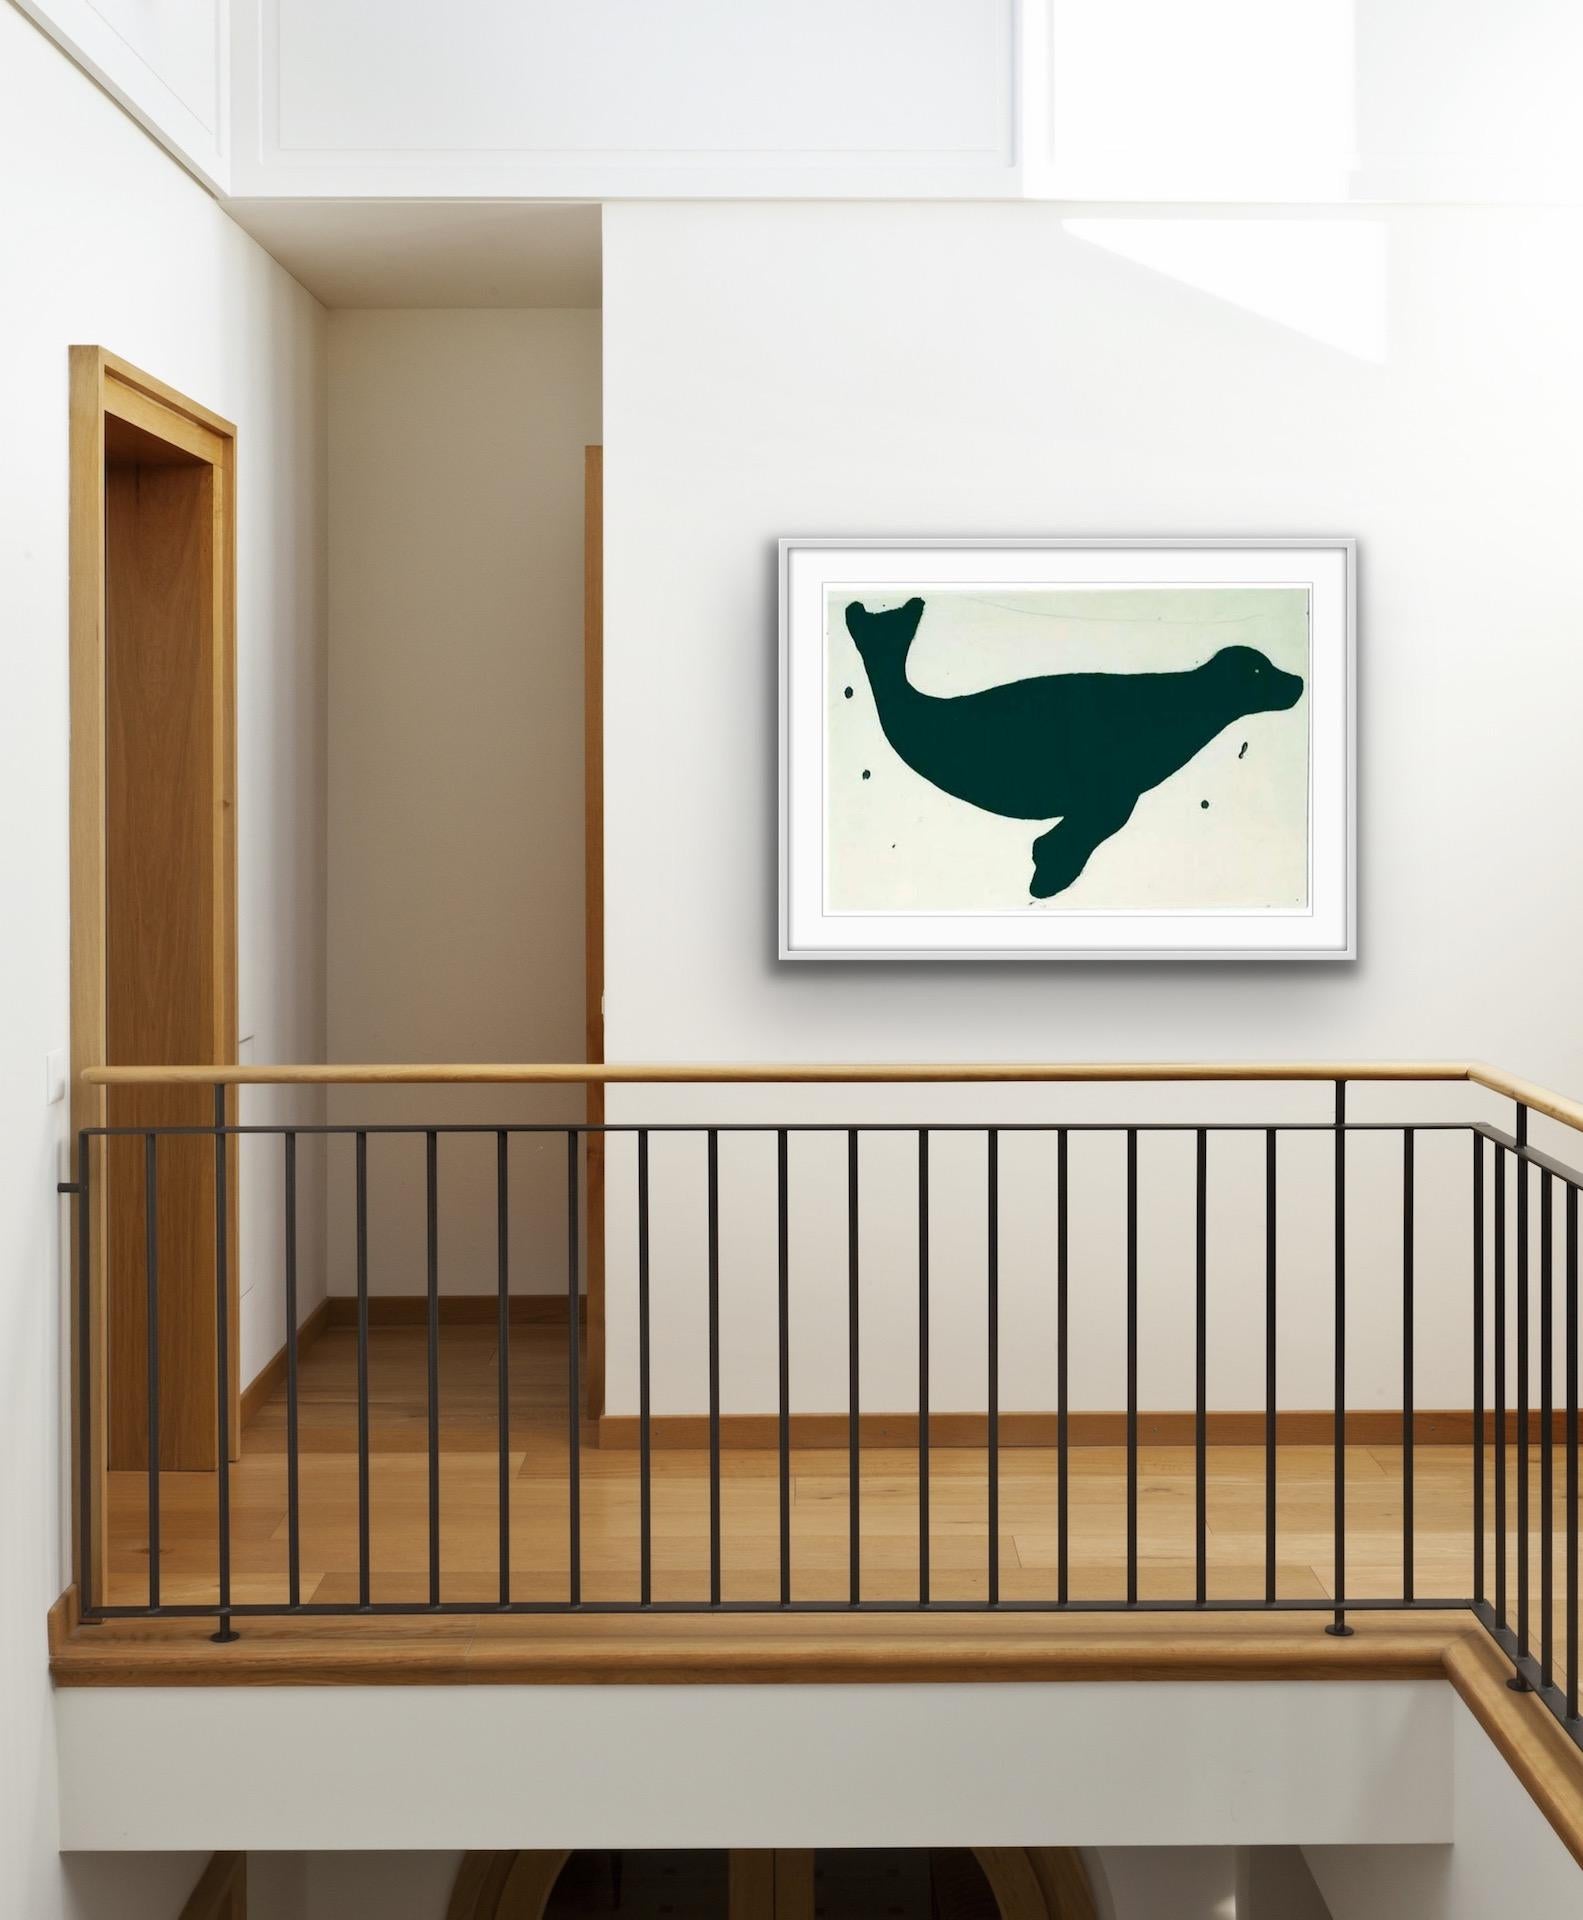 Kate Boxer
Seal
Limited Edition Print
Sold Unframed
(Please note that in situ images are purely an indication of how a piece may look).

Seal by Kate Boxer is a limited edition print with drypoint and carborundum.  Seal has been signed by the